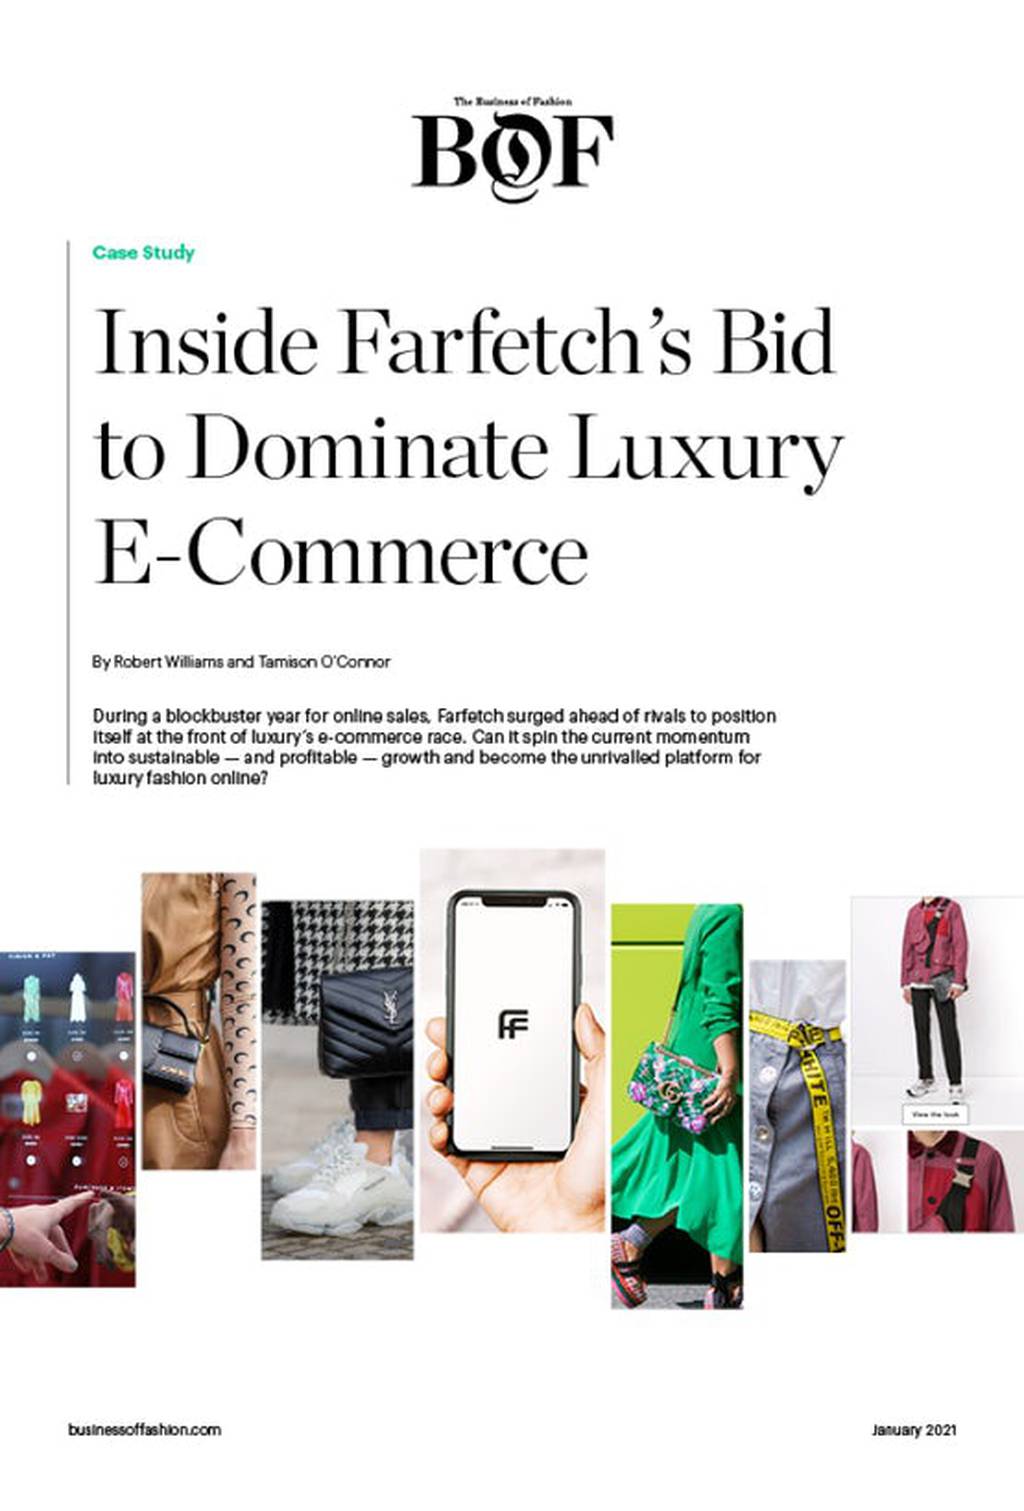 Farfetch is making a bid to position itself at the front of luxury’s e-commerce race.